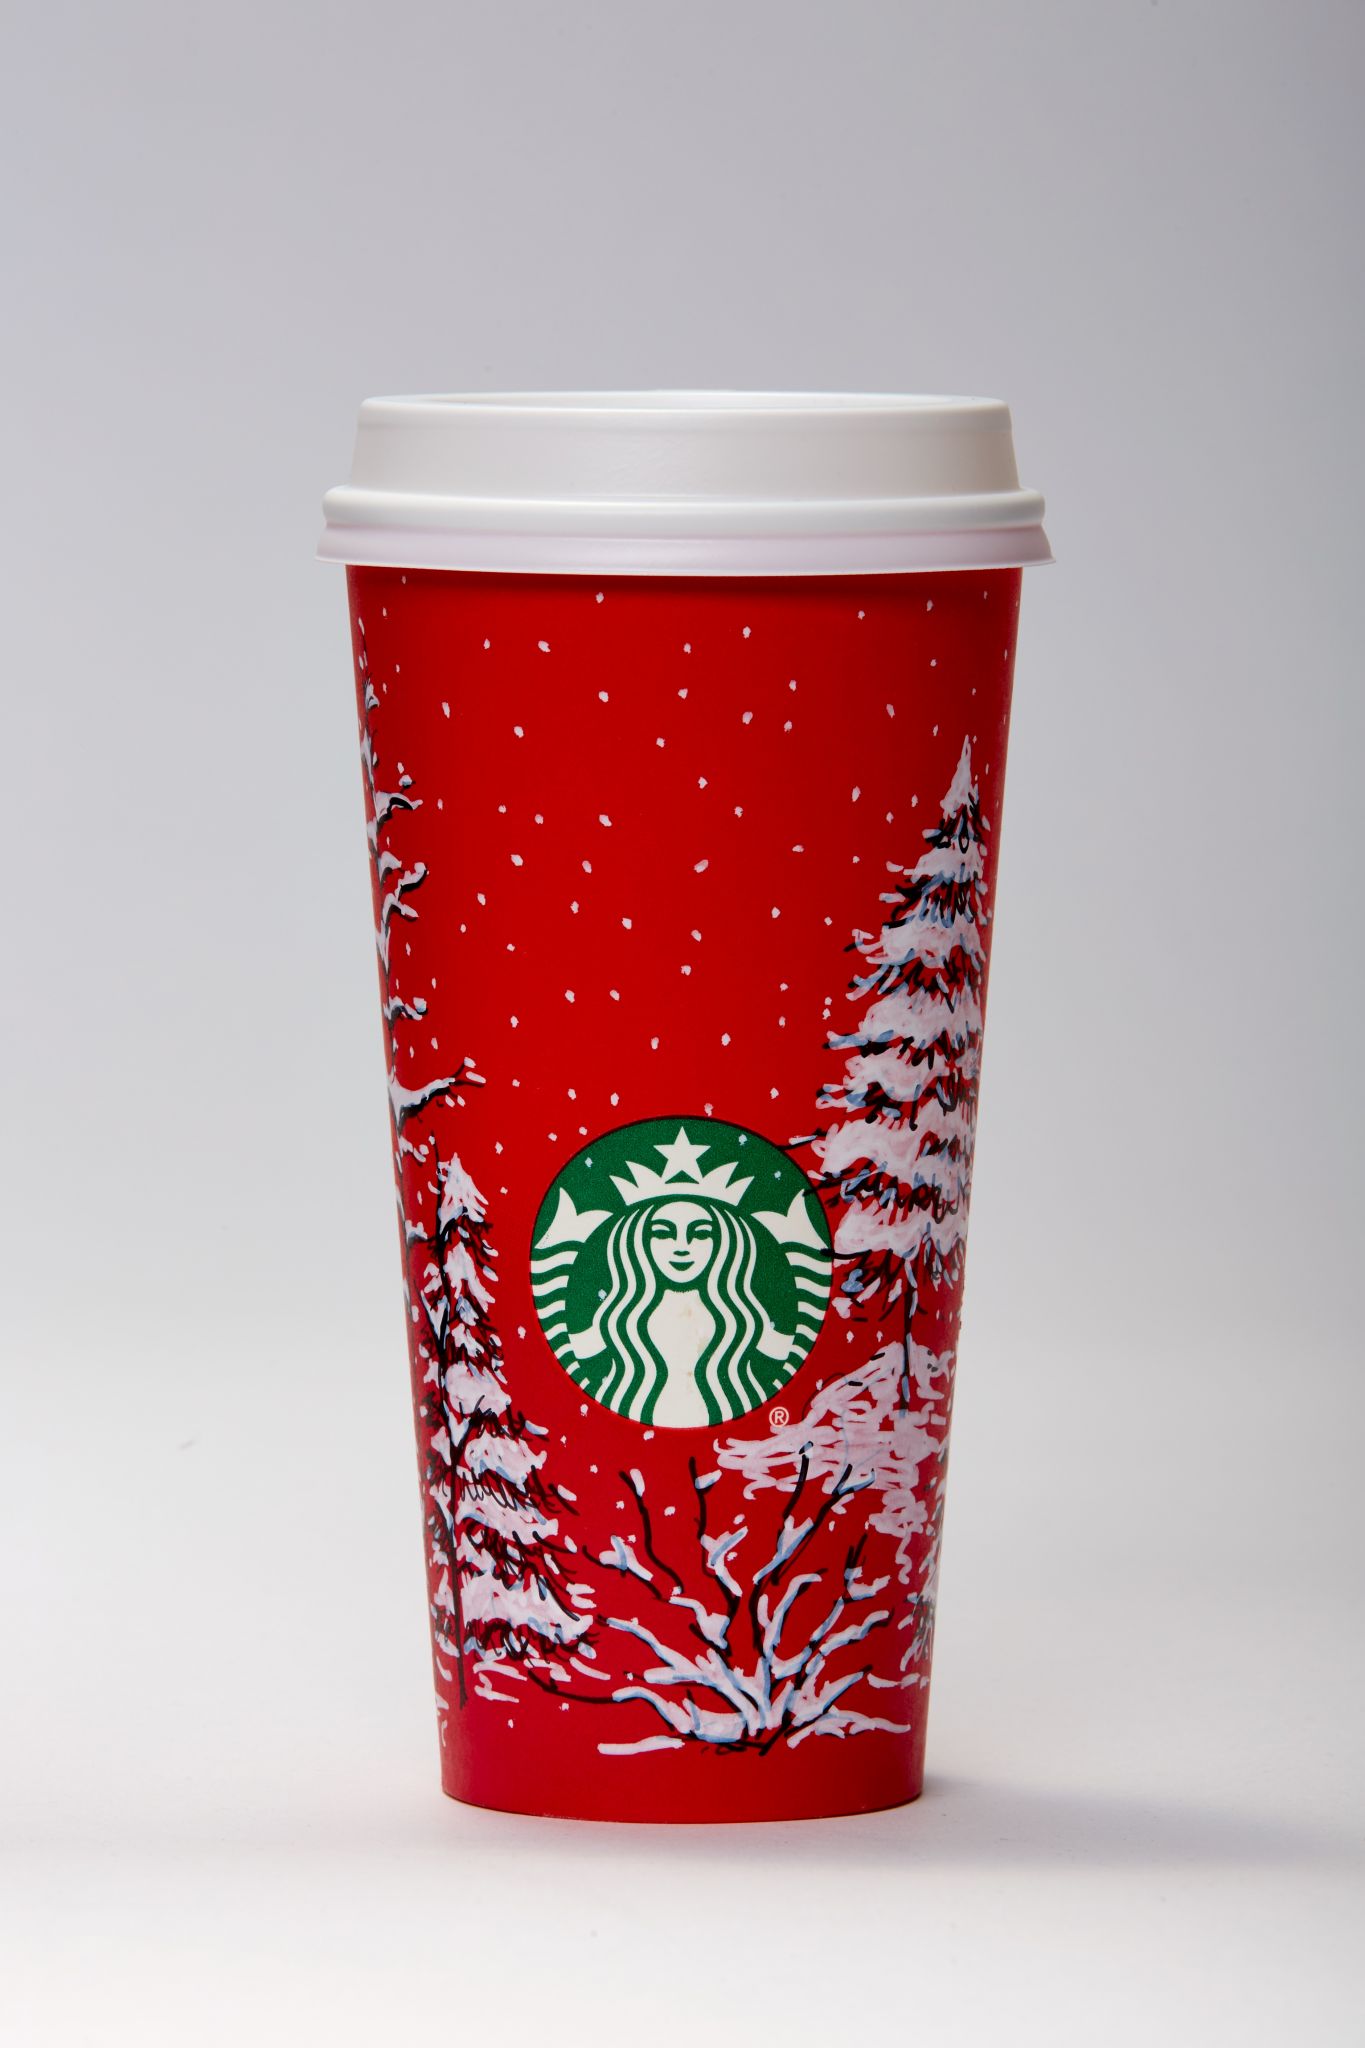 The Christmas Season Can Officially Start: Starbucks' Holiday Cups